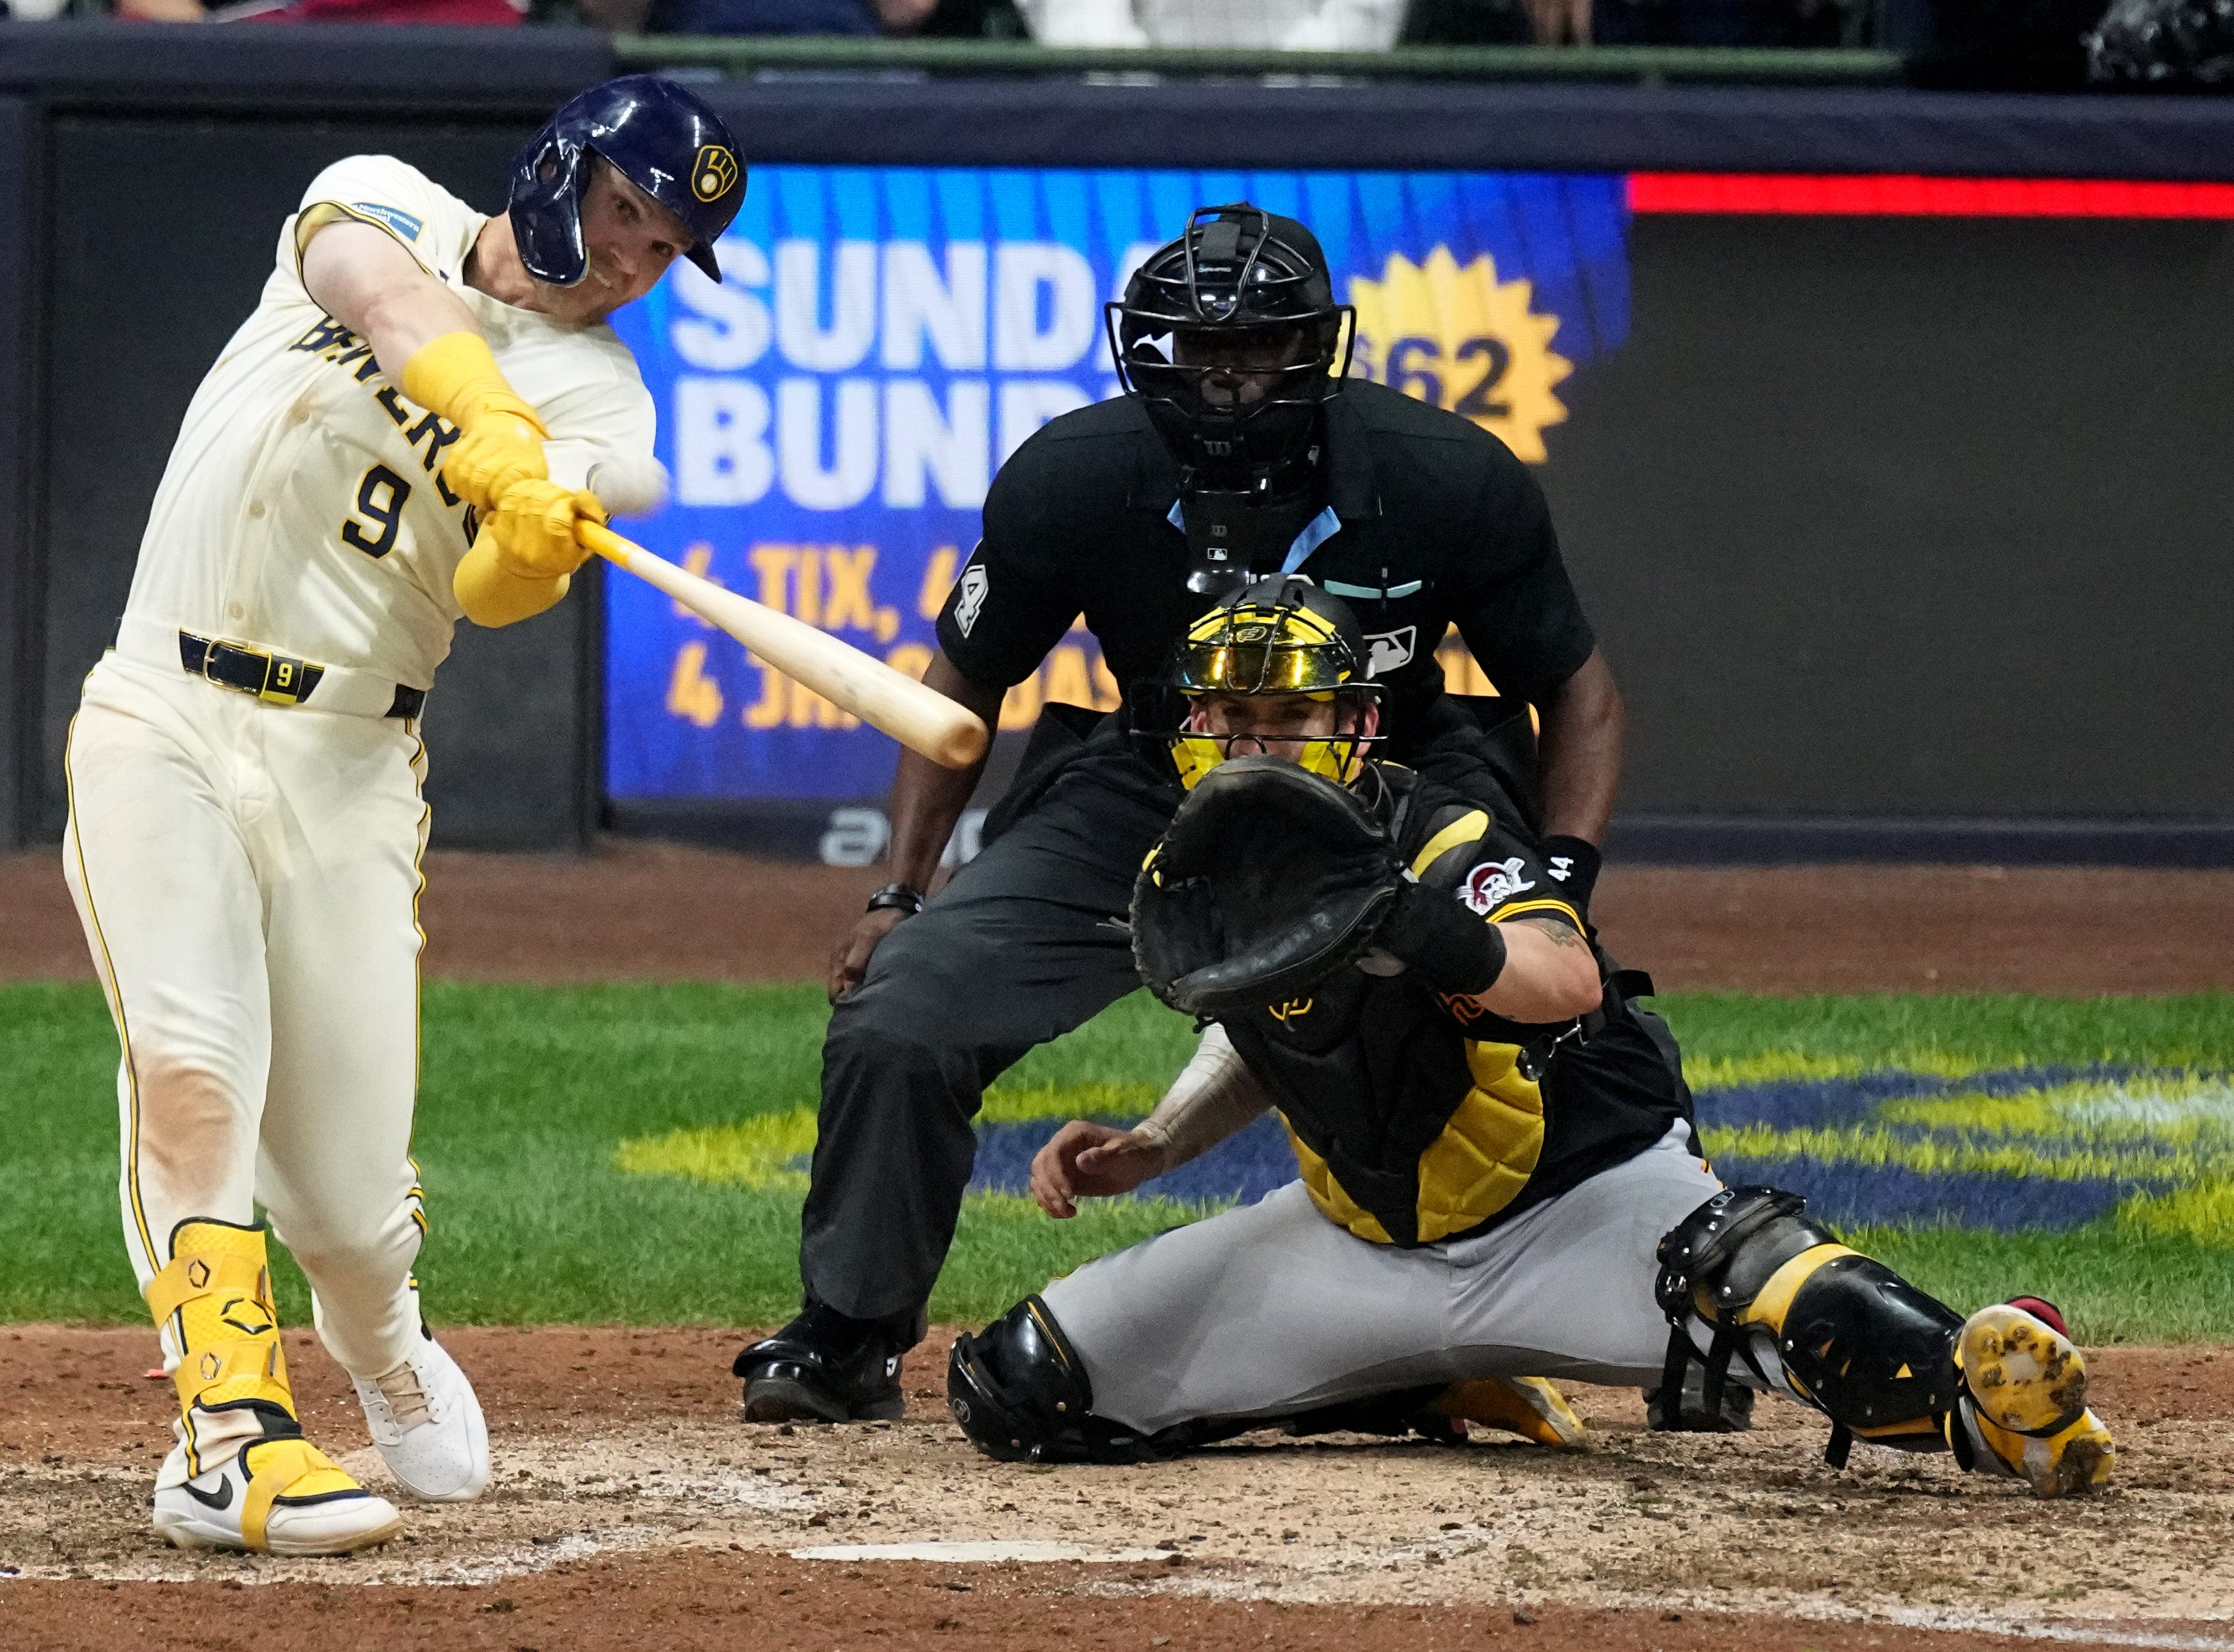 Pirates 8, Brewers 6: Loss is doubly painful as Rhys Hoskins leaves early due to injury